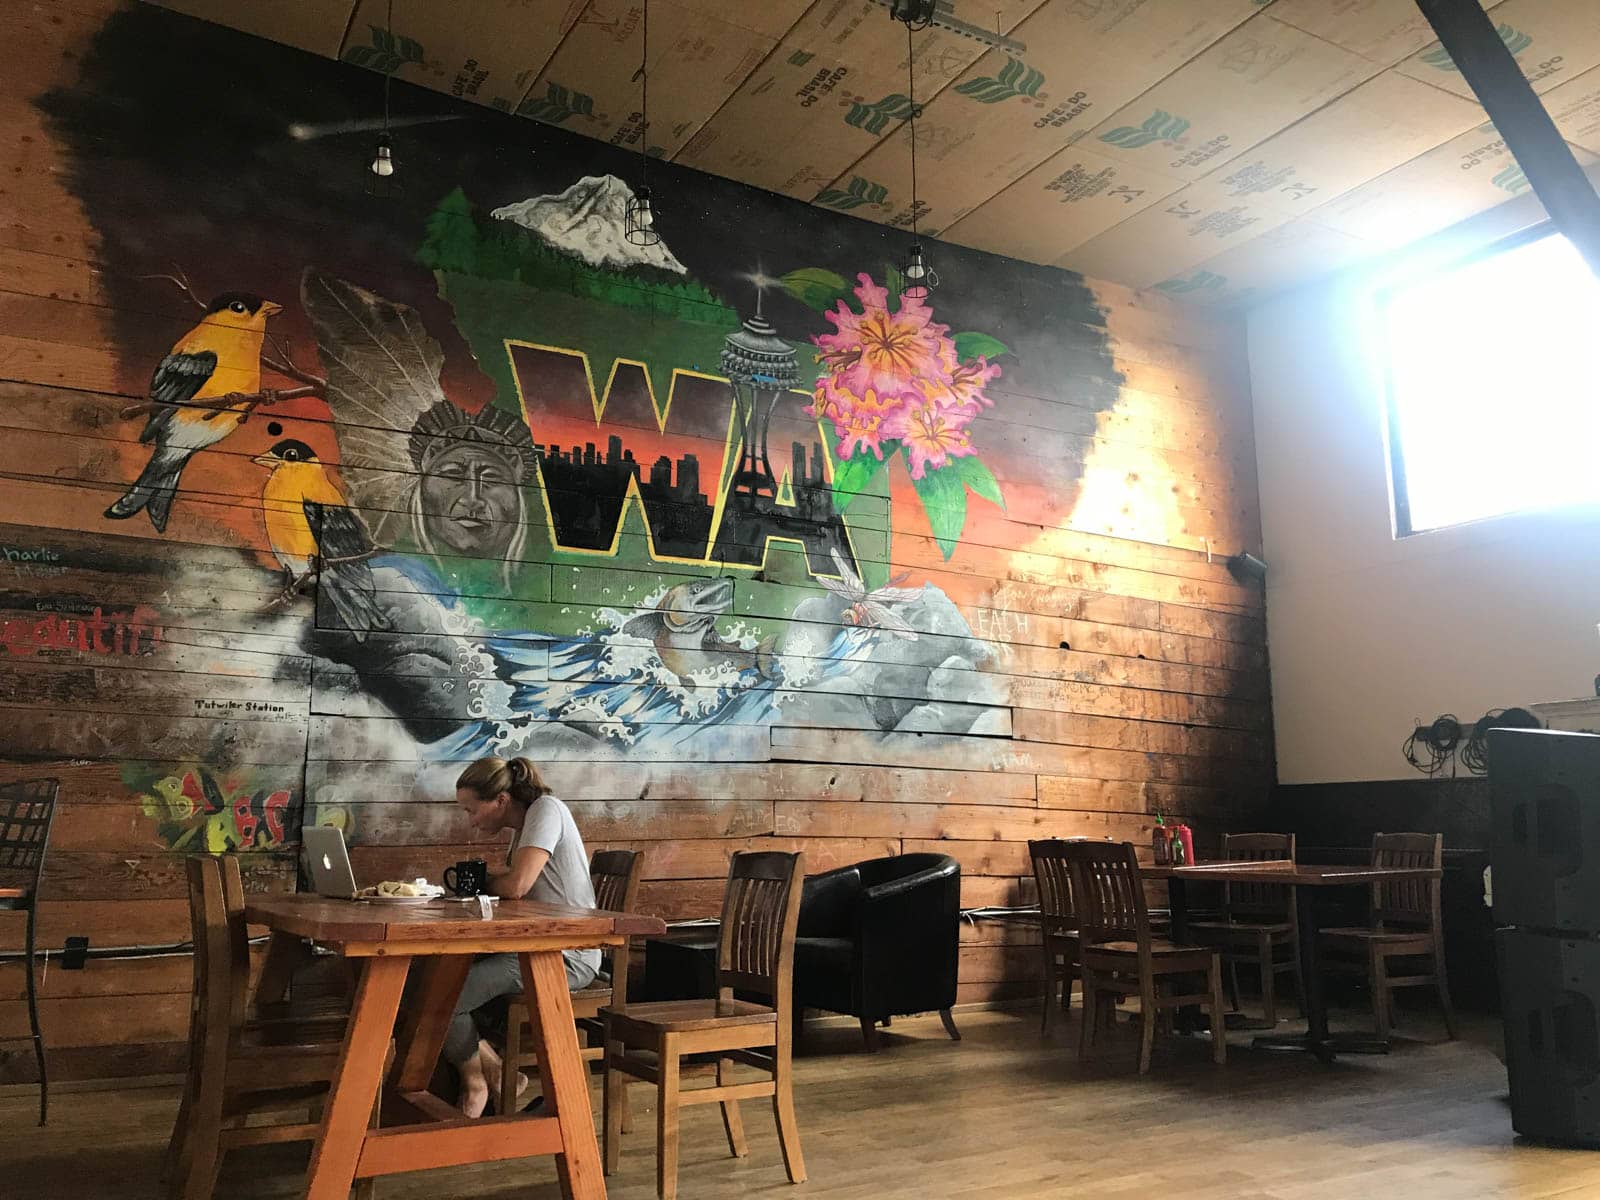 A cafe setting with wooden tables and chairs, and a wooden wall with a giant colourful mural reading â€œWAâ€� with some icons of the state of Washington in USA. A woman sits with a laptop at one of the tables, deep in focus.